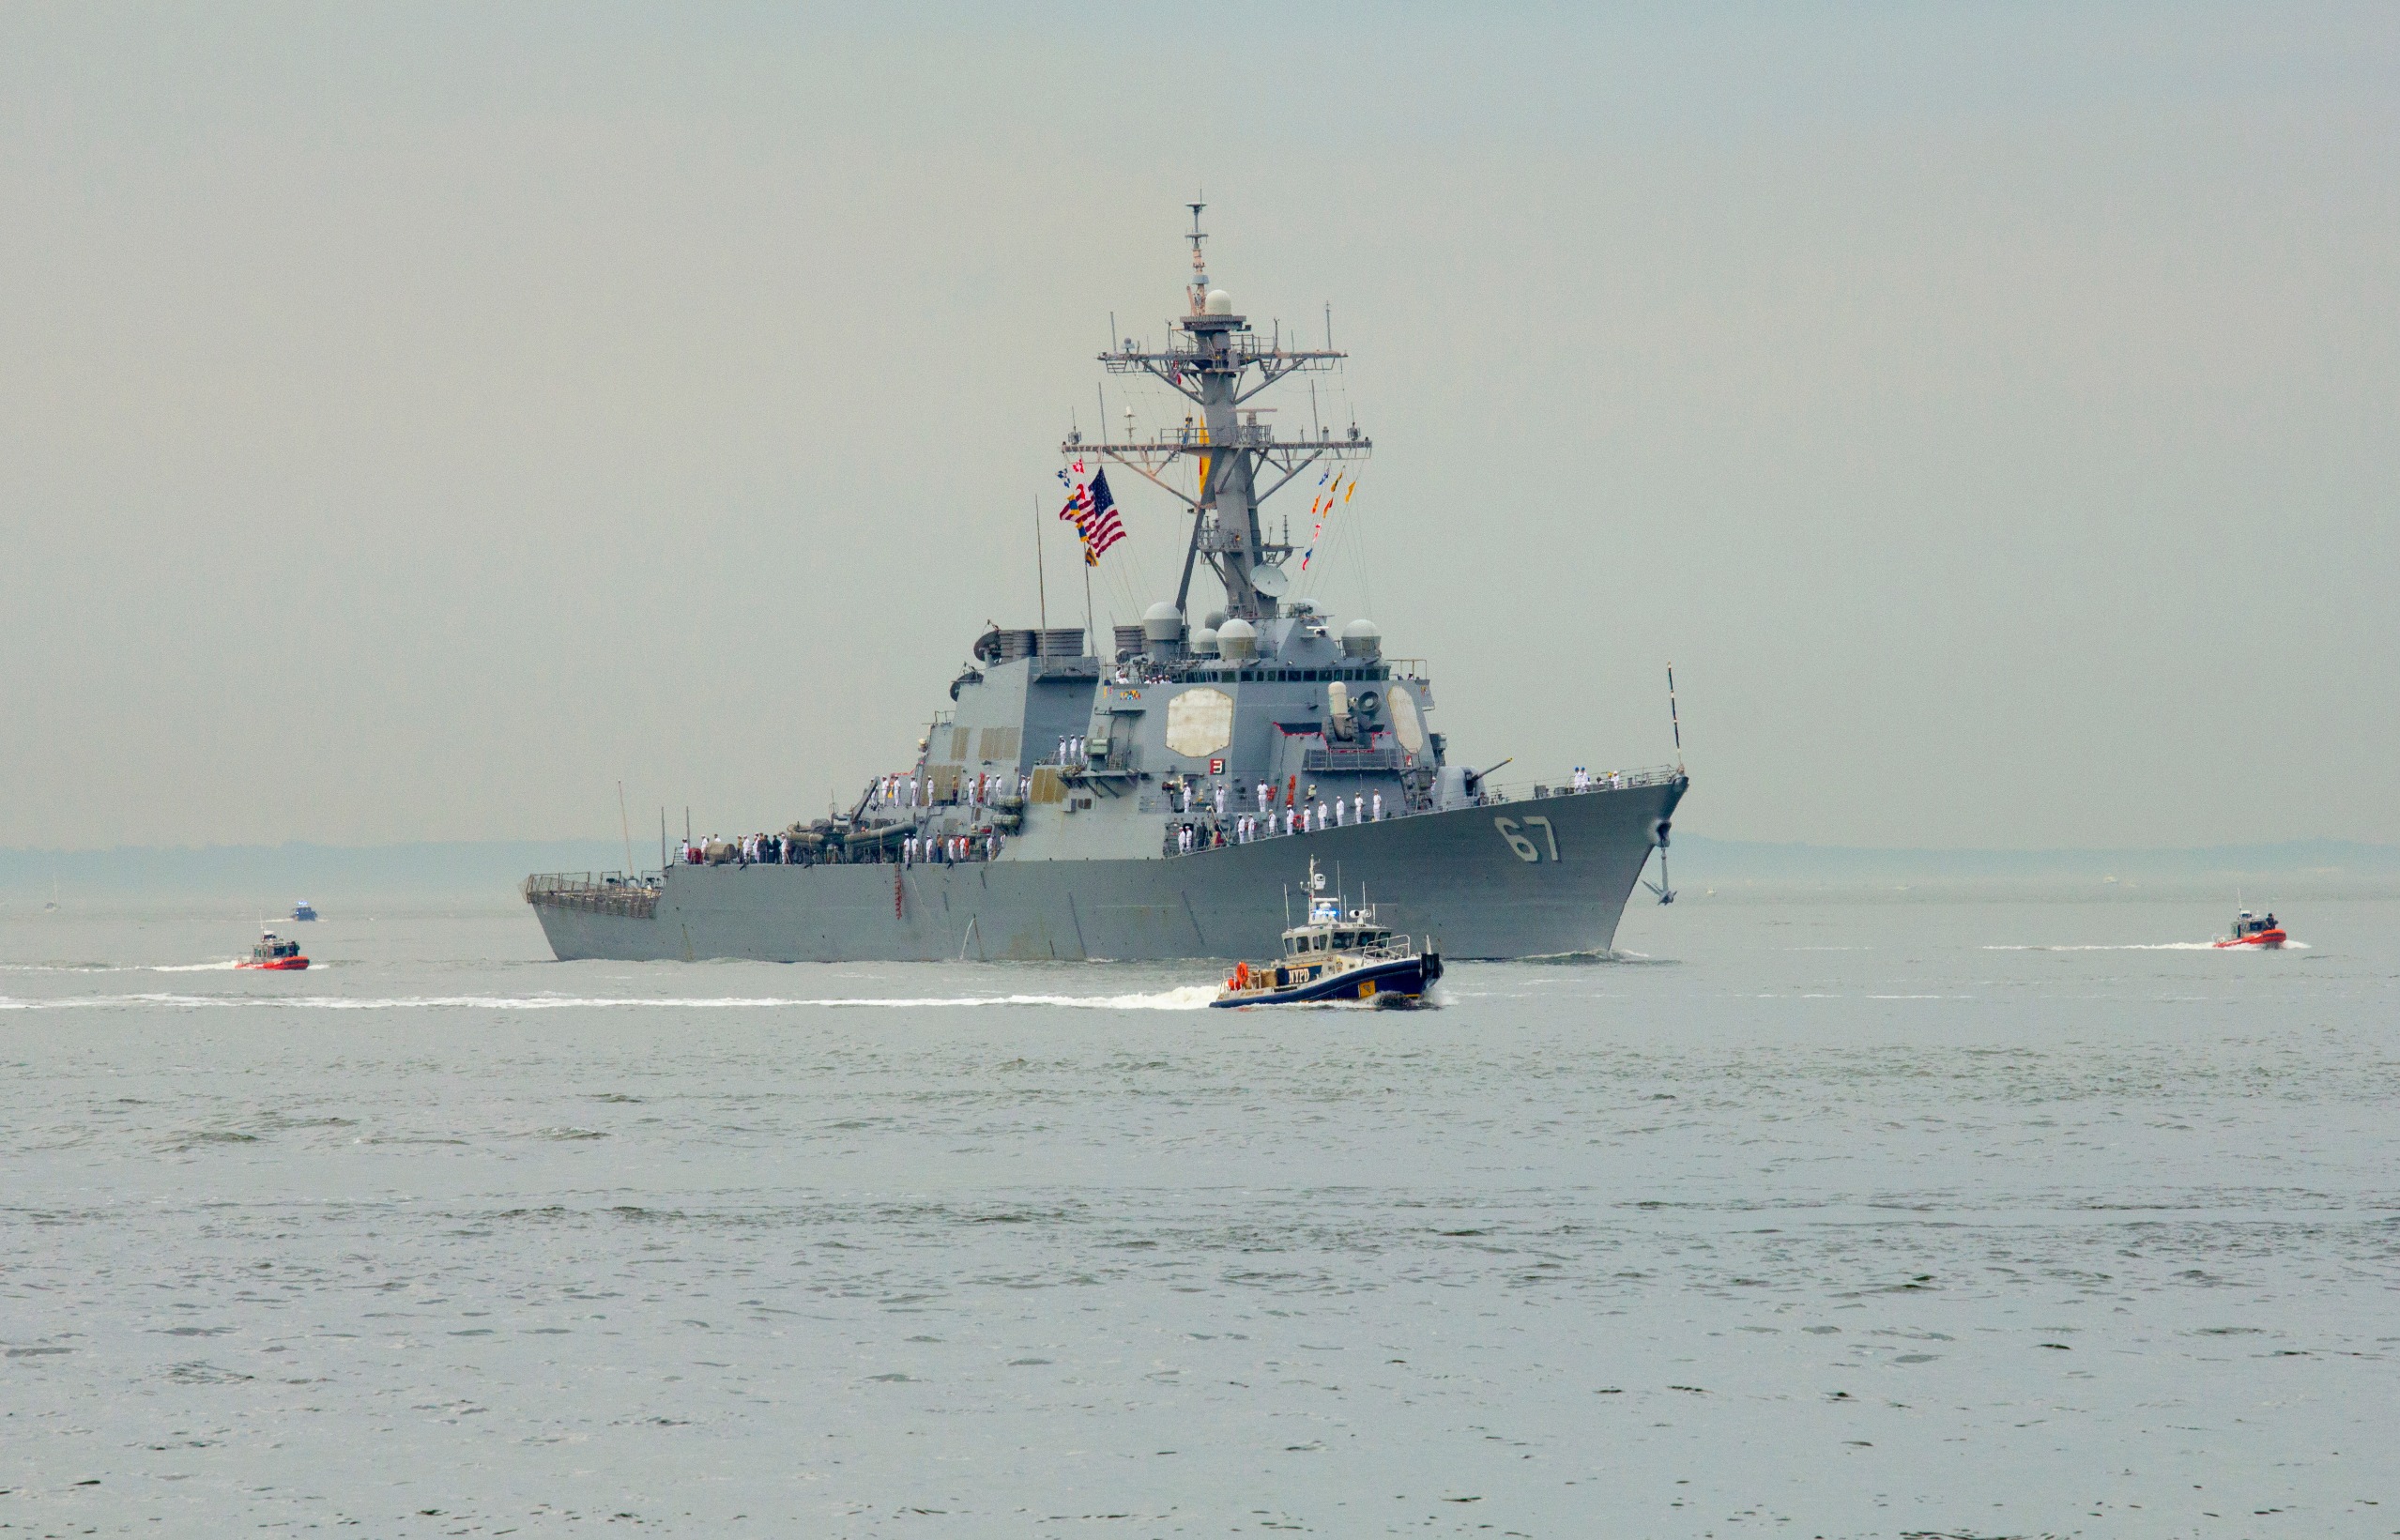 U.S. Judge Awards $807M Judgment To Victims Of USS Cole Bombing